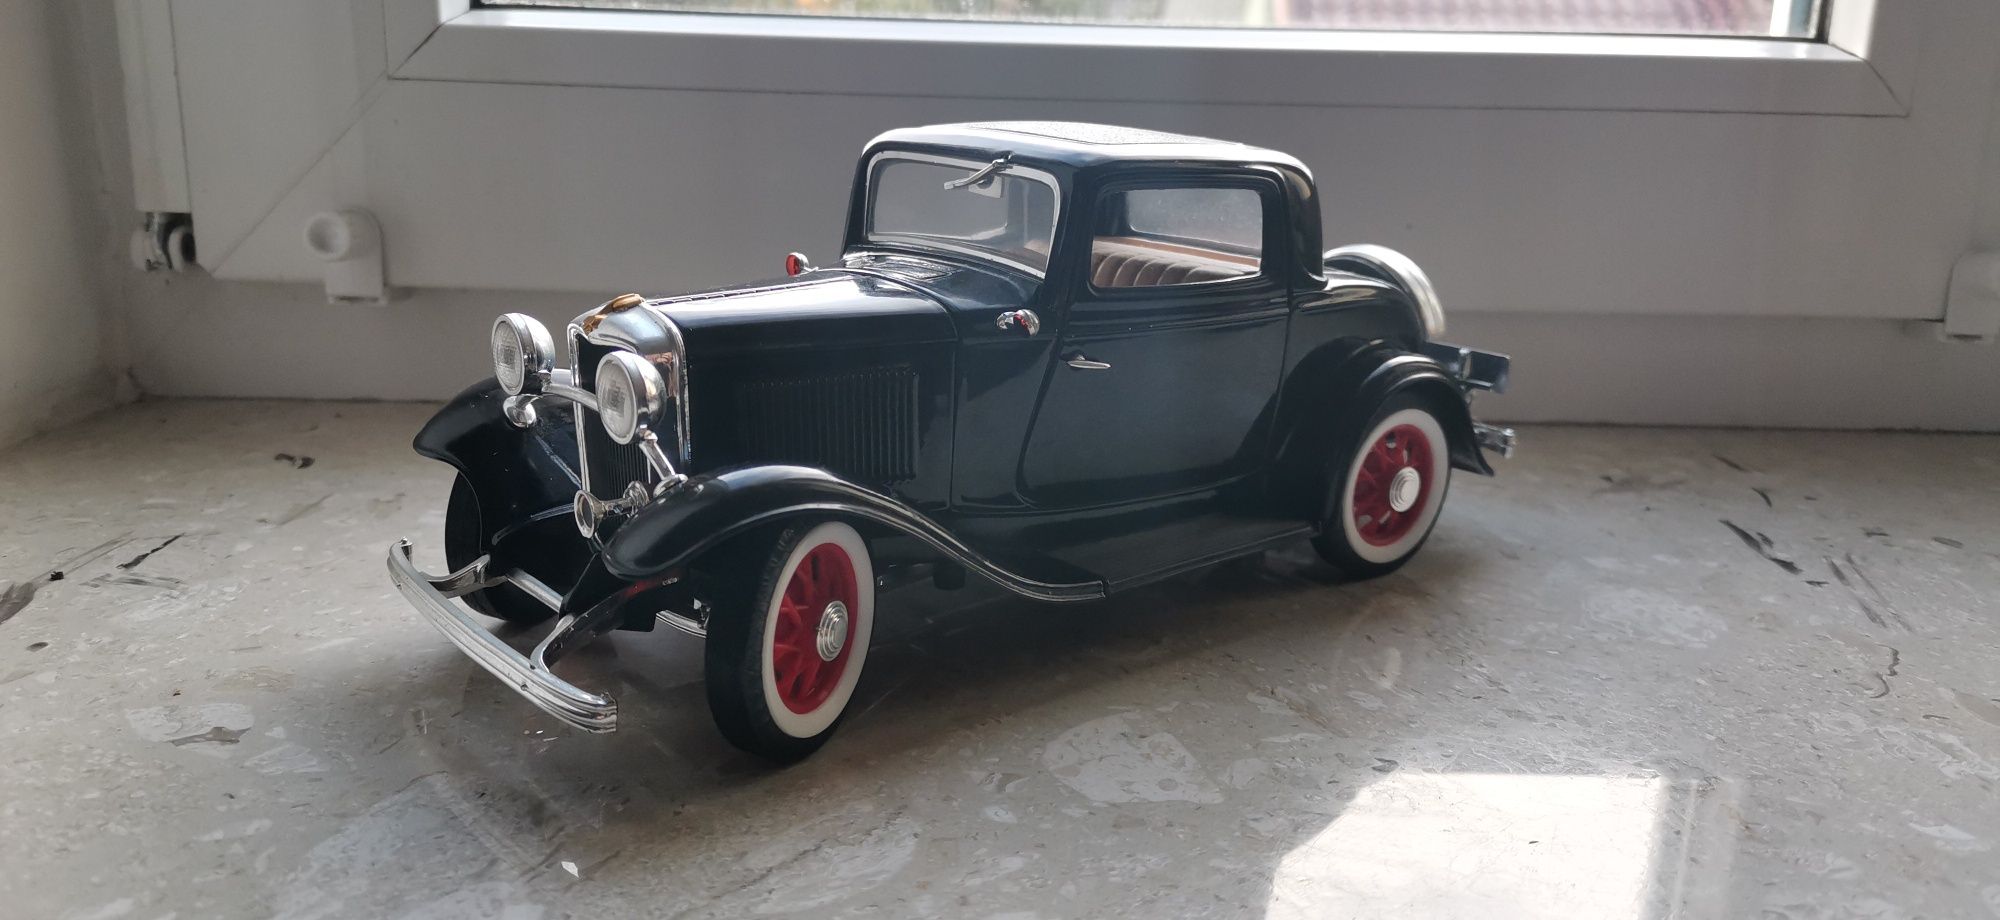 Ford 3-window coupe 1932 roadslegends